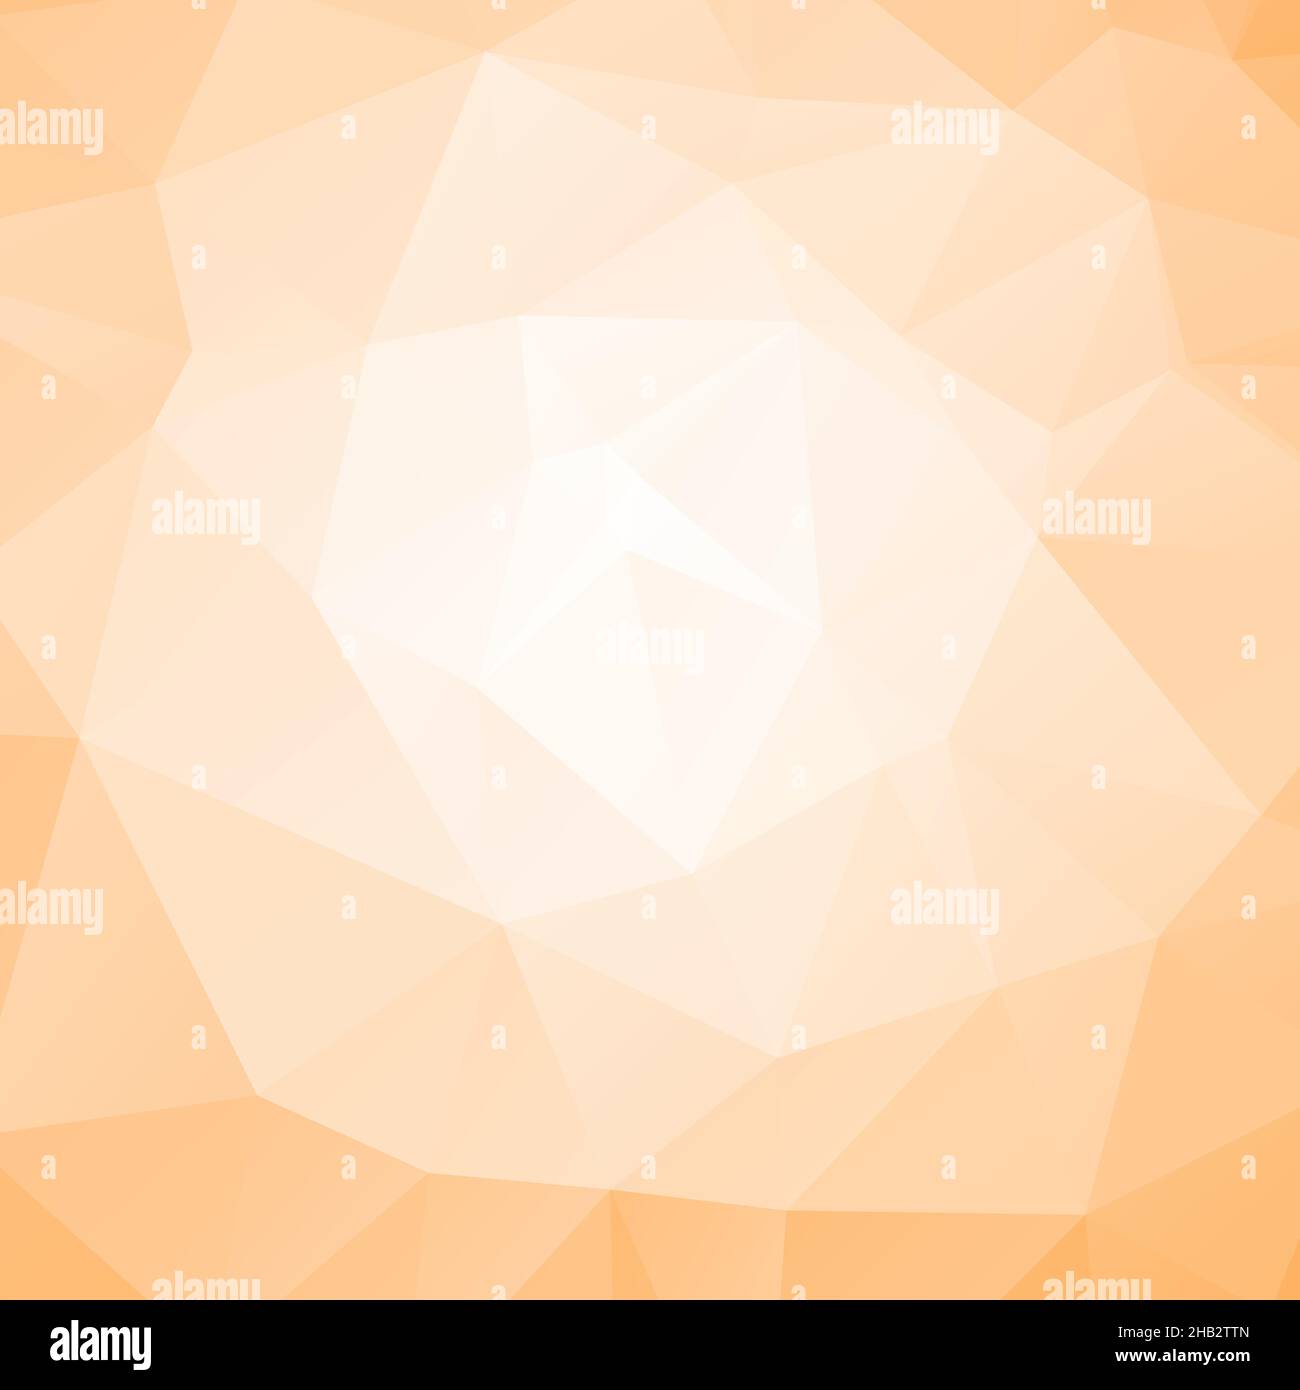 Abstract polygonal background, vector illustration Stock Vector